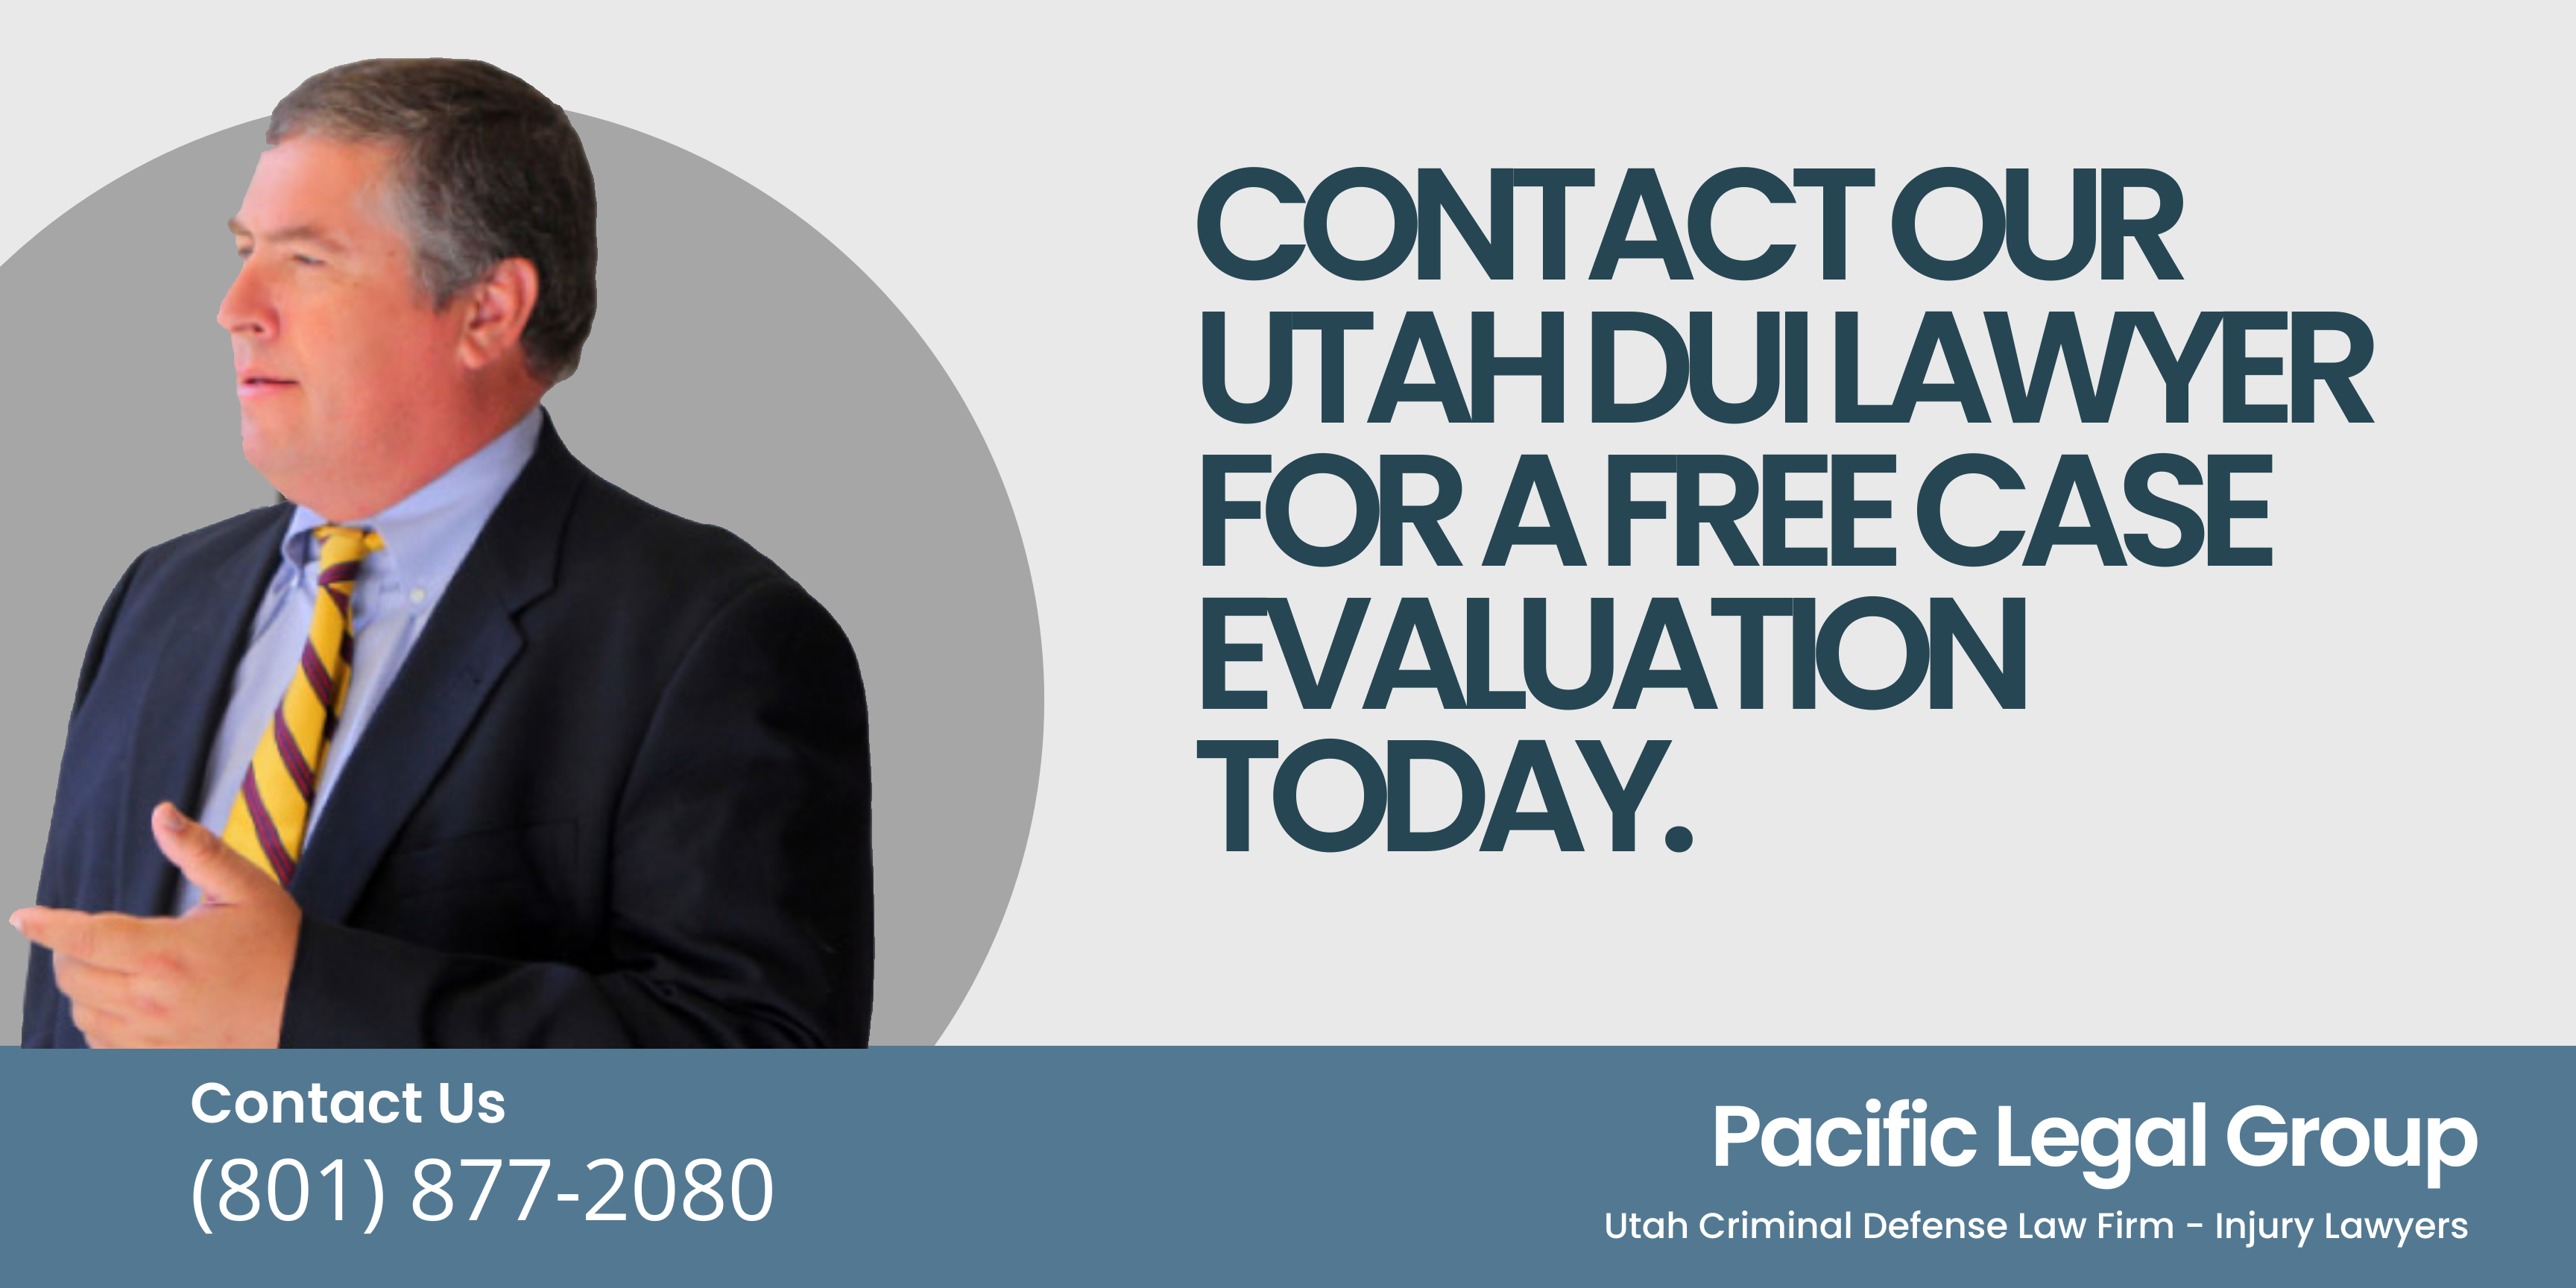 Pacific Legal Group is your Utah DUI lawyer